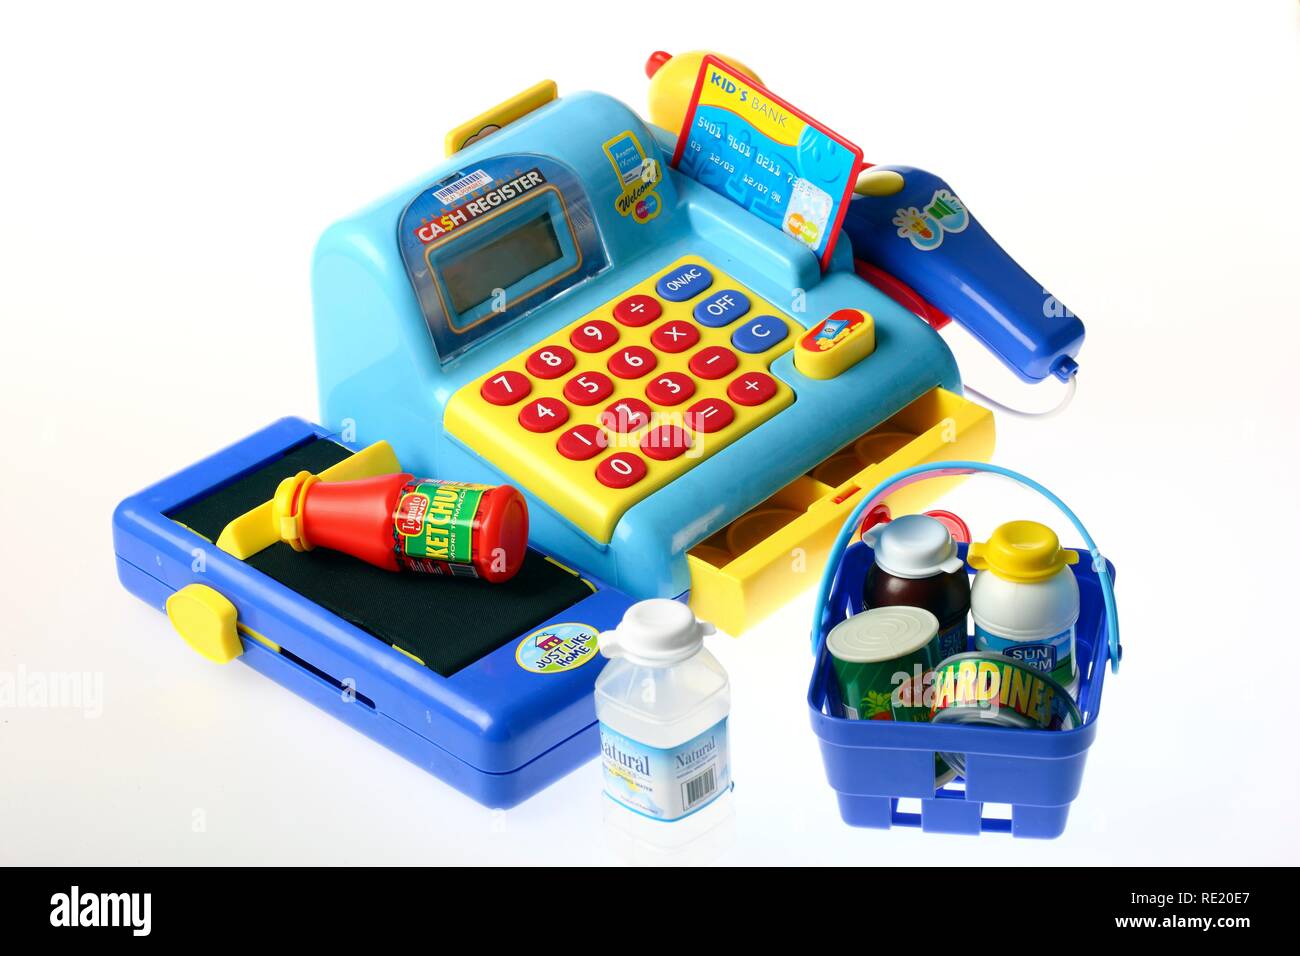 Toy cash register with keyboard, scanner, card reader, treadmill, coins and goods Stock Photo